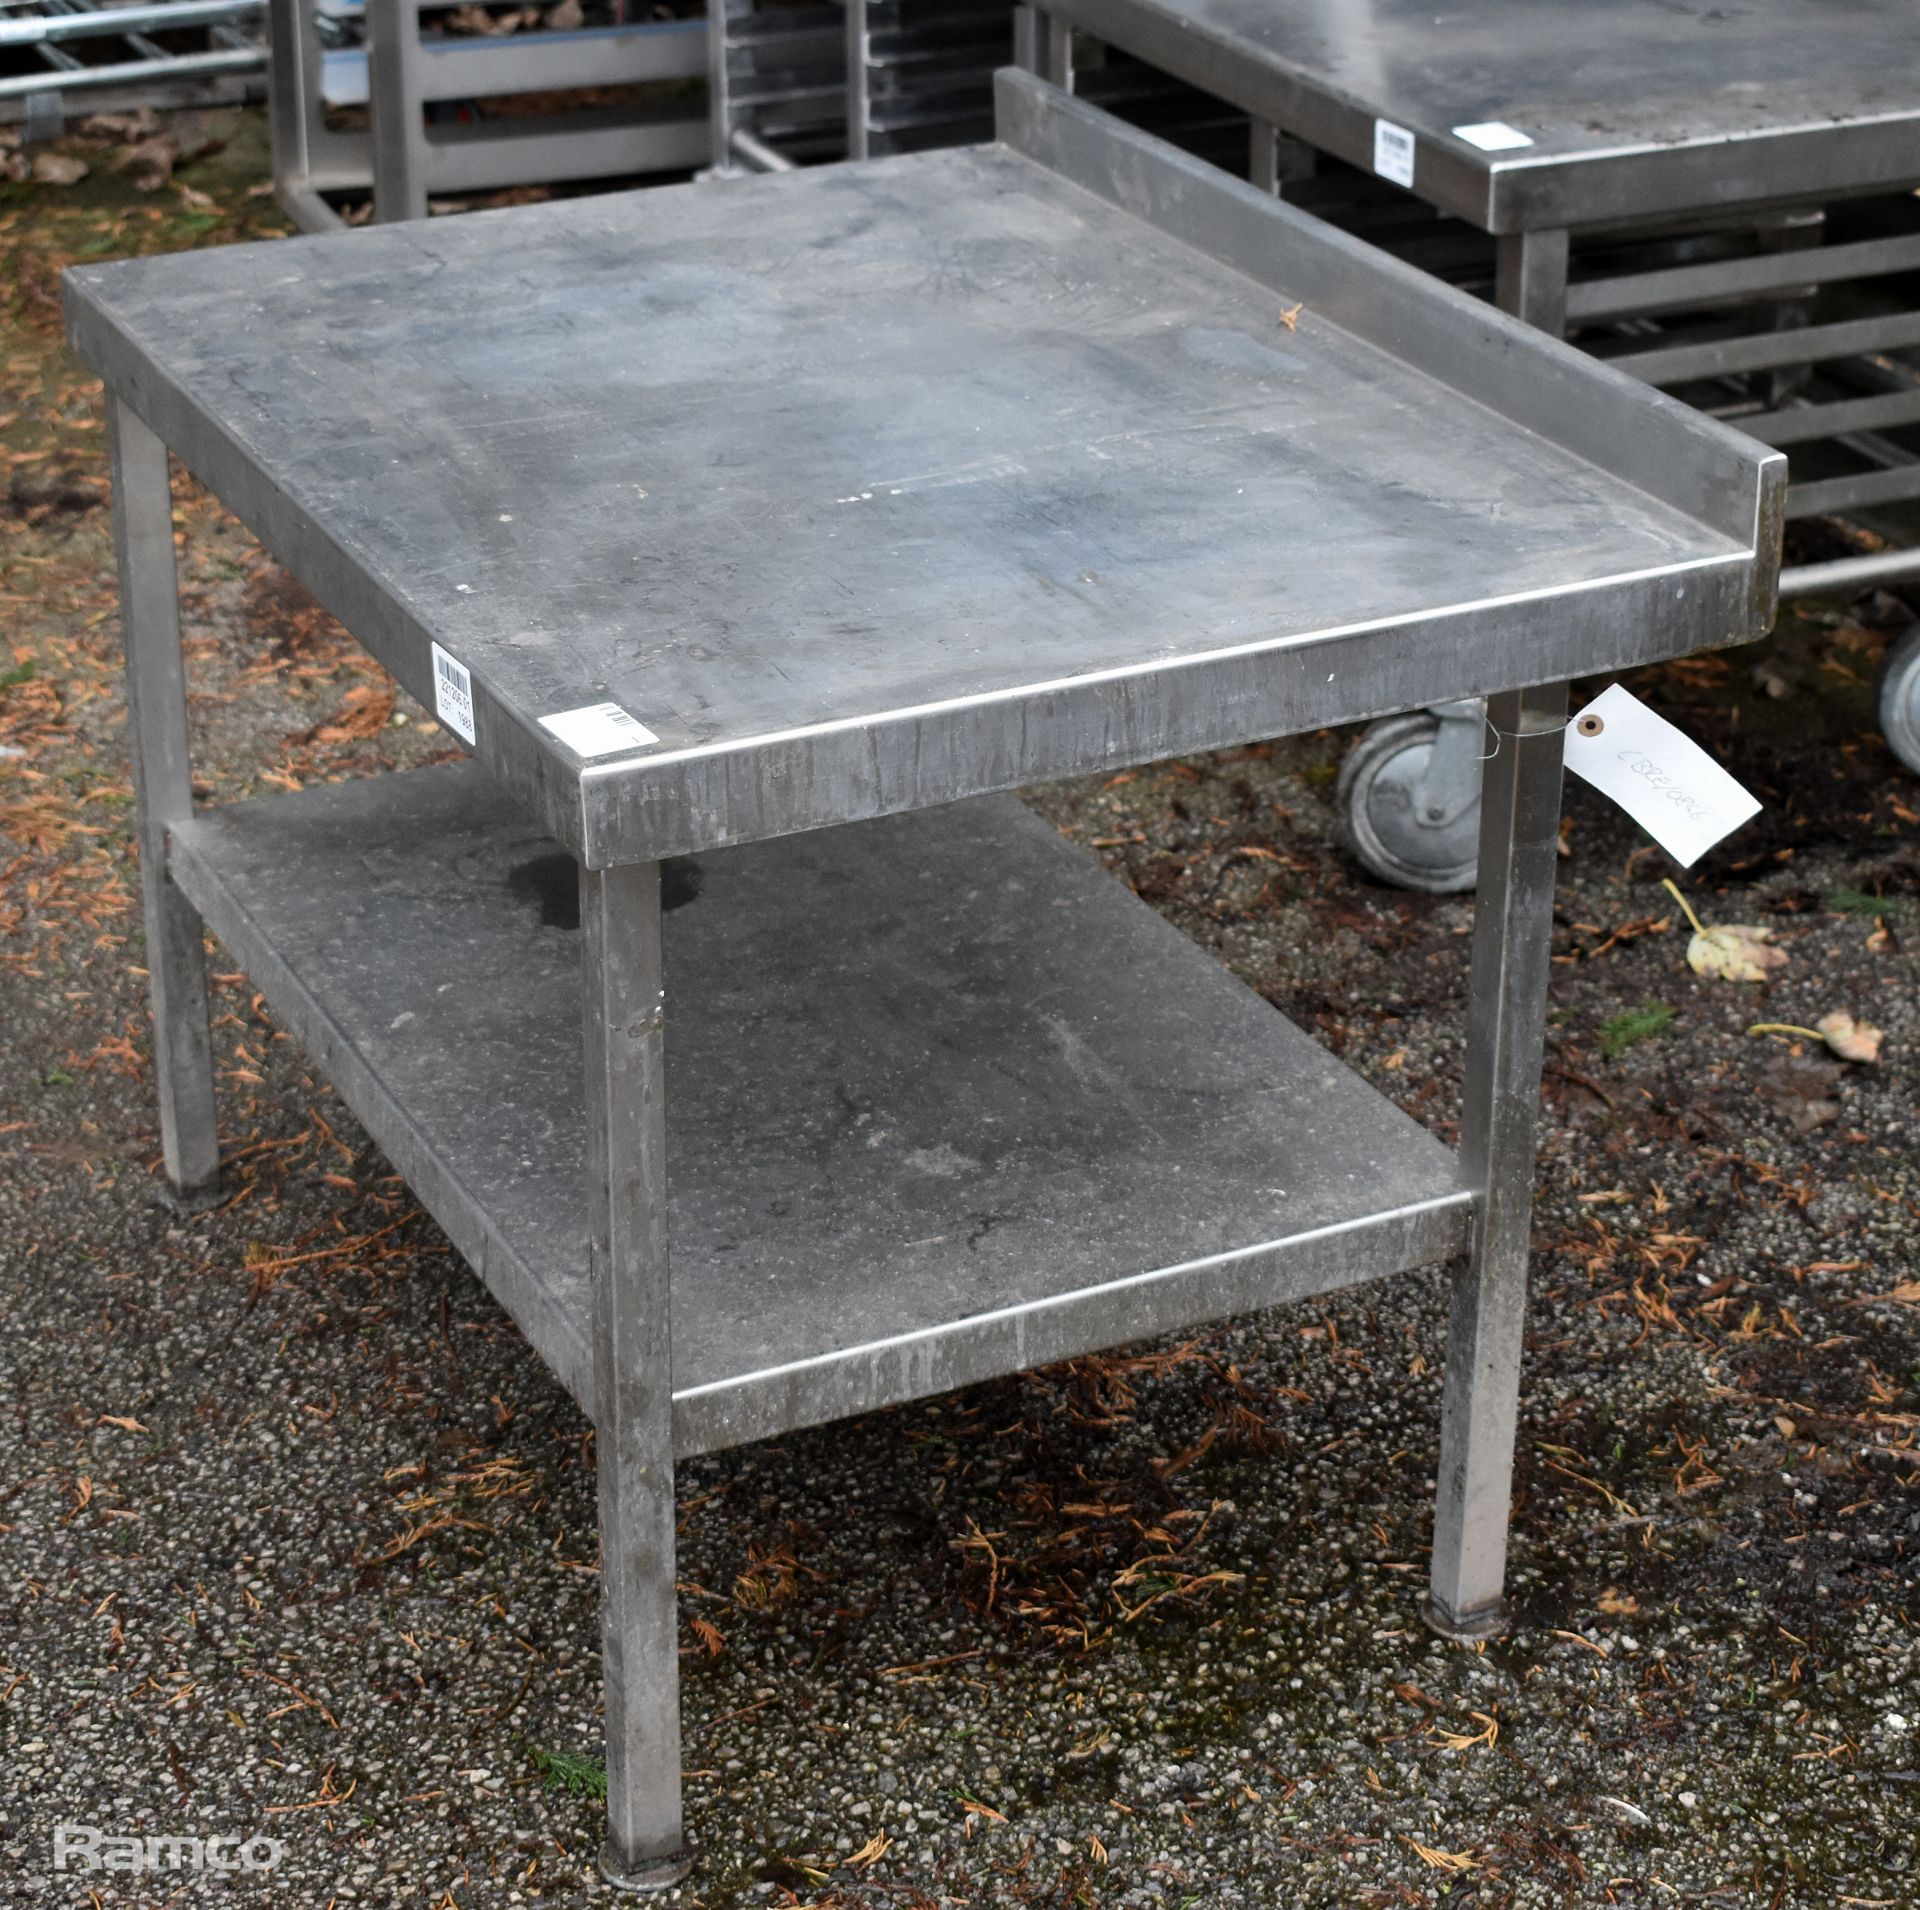 Stainless steel table with shelf - 65 x 85 x 66cm - Image 2 of 2